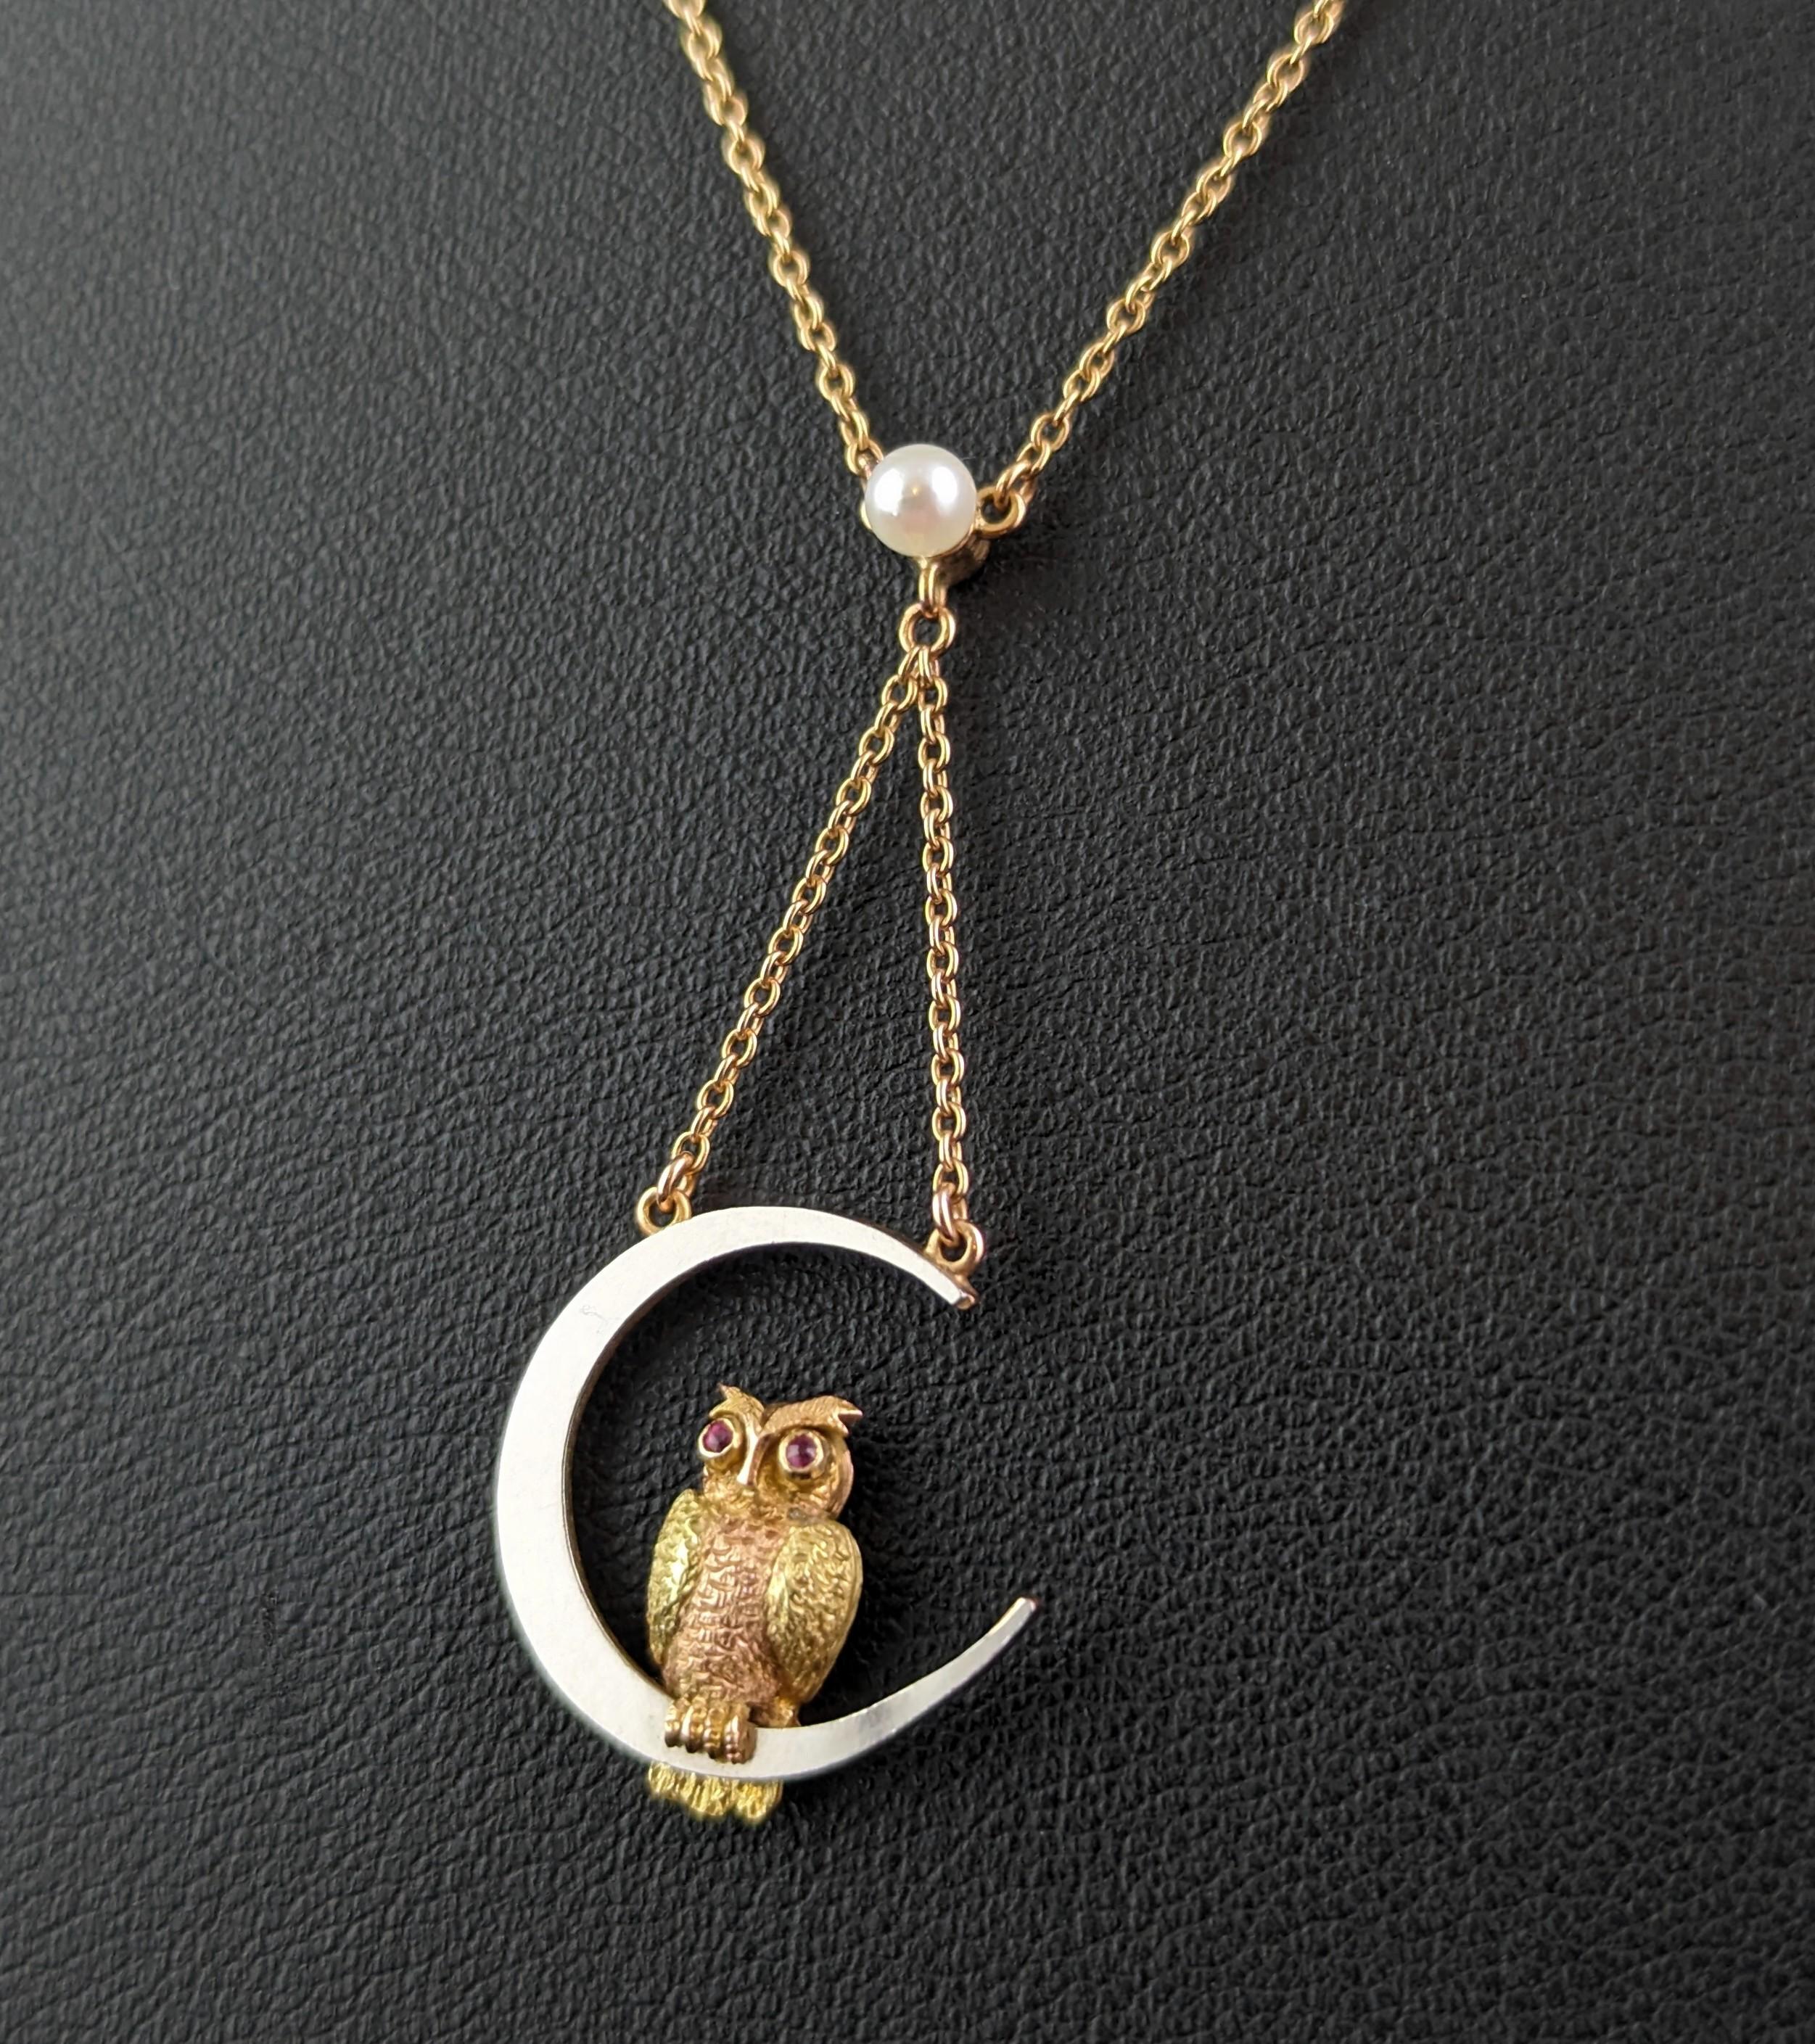 Cabochon Antique Owl and Crescent moon pendant necklace, 15k gold and platinum, Ruby For Sale